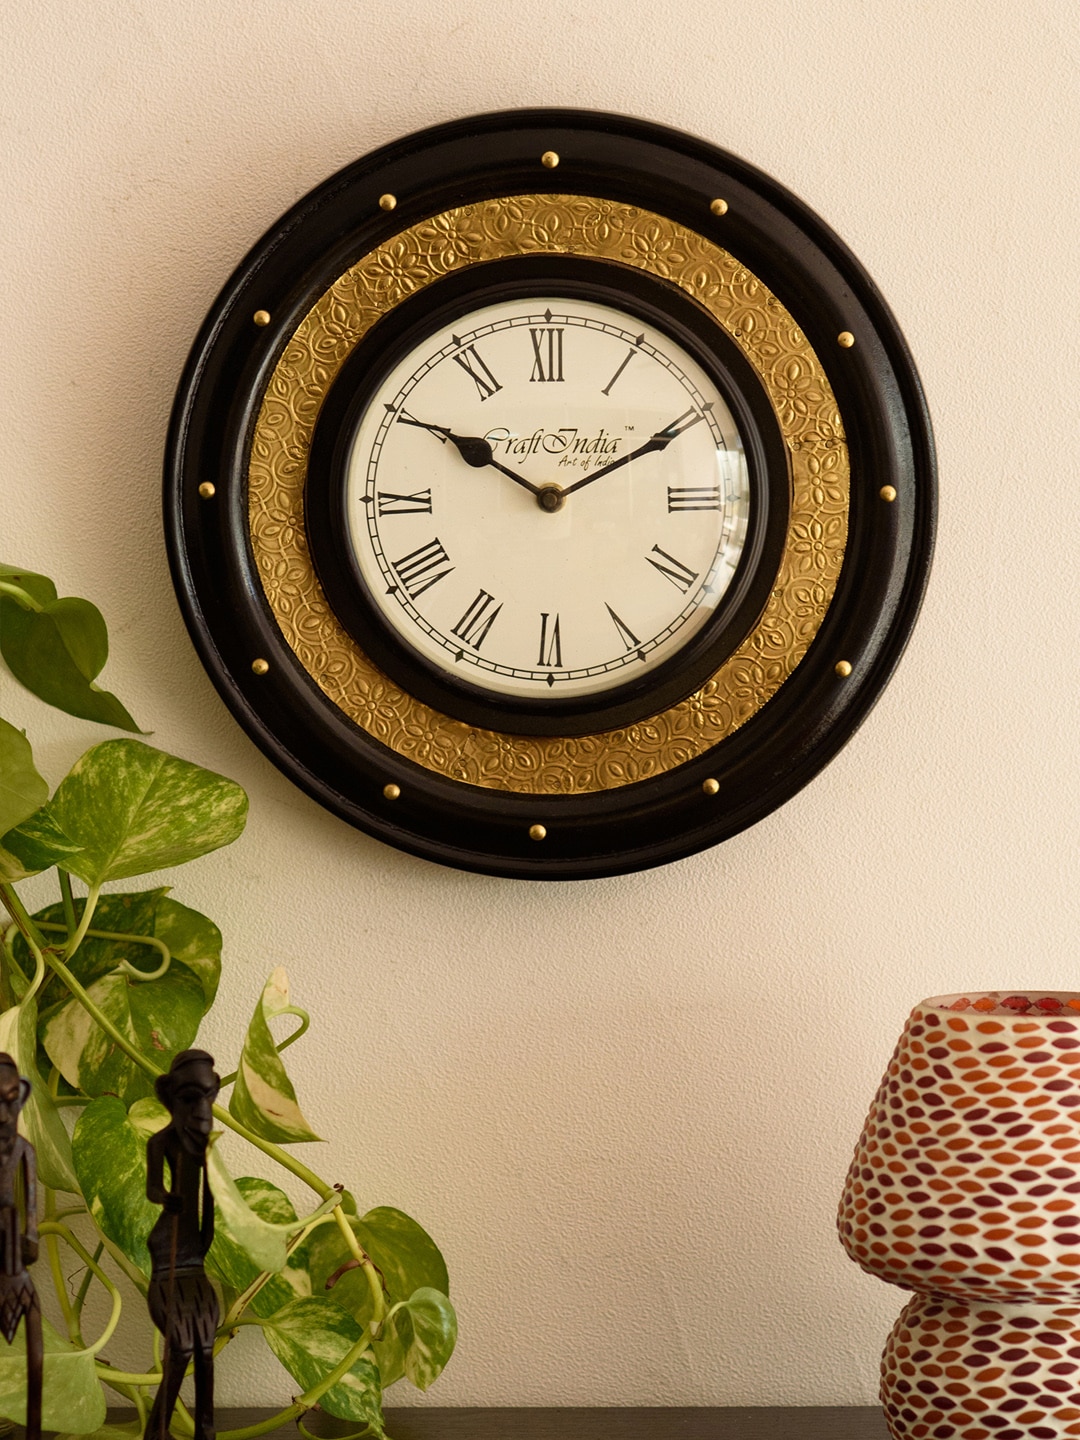 eCraftIndia White & Gold-Toned Handcrafted Round Embellished Analogue Wall Clock Price in India